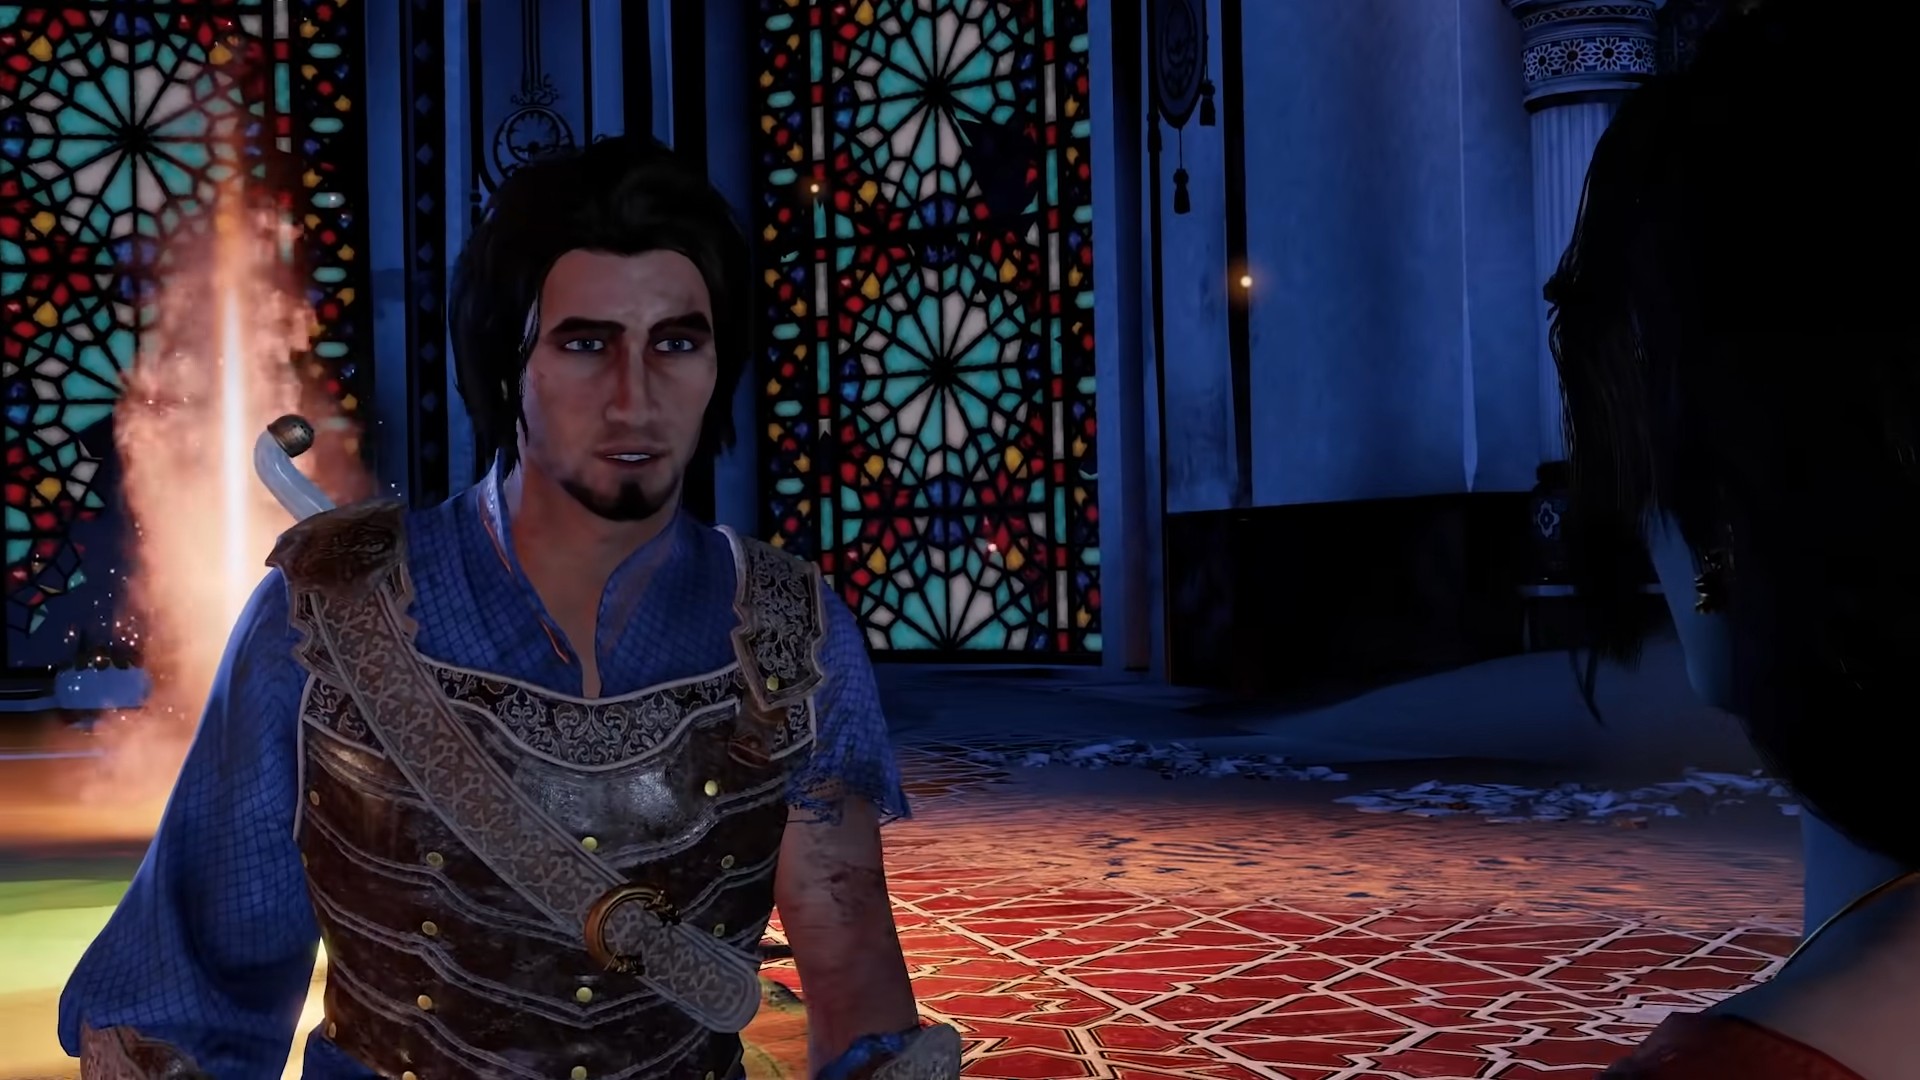 Prince of Persia: The Sands of Time Remake is aiming for 2022-23